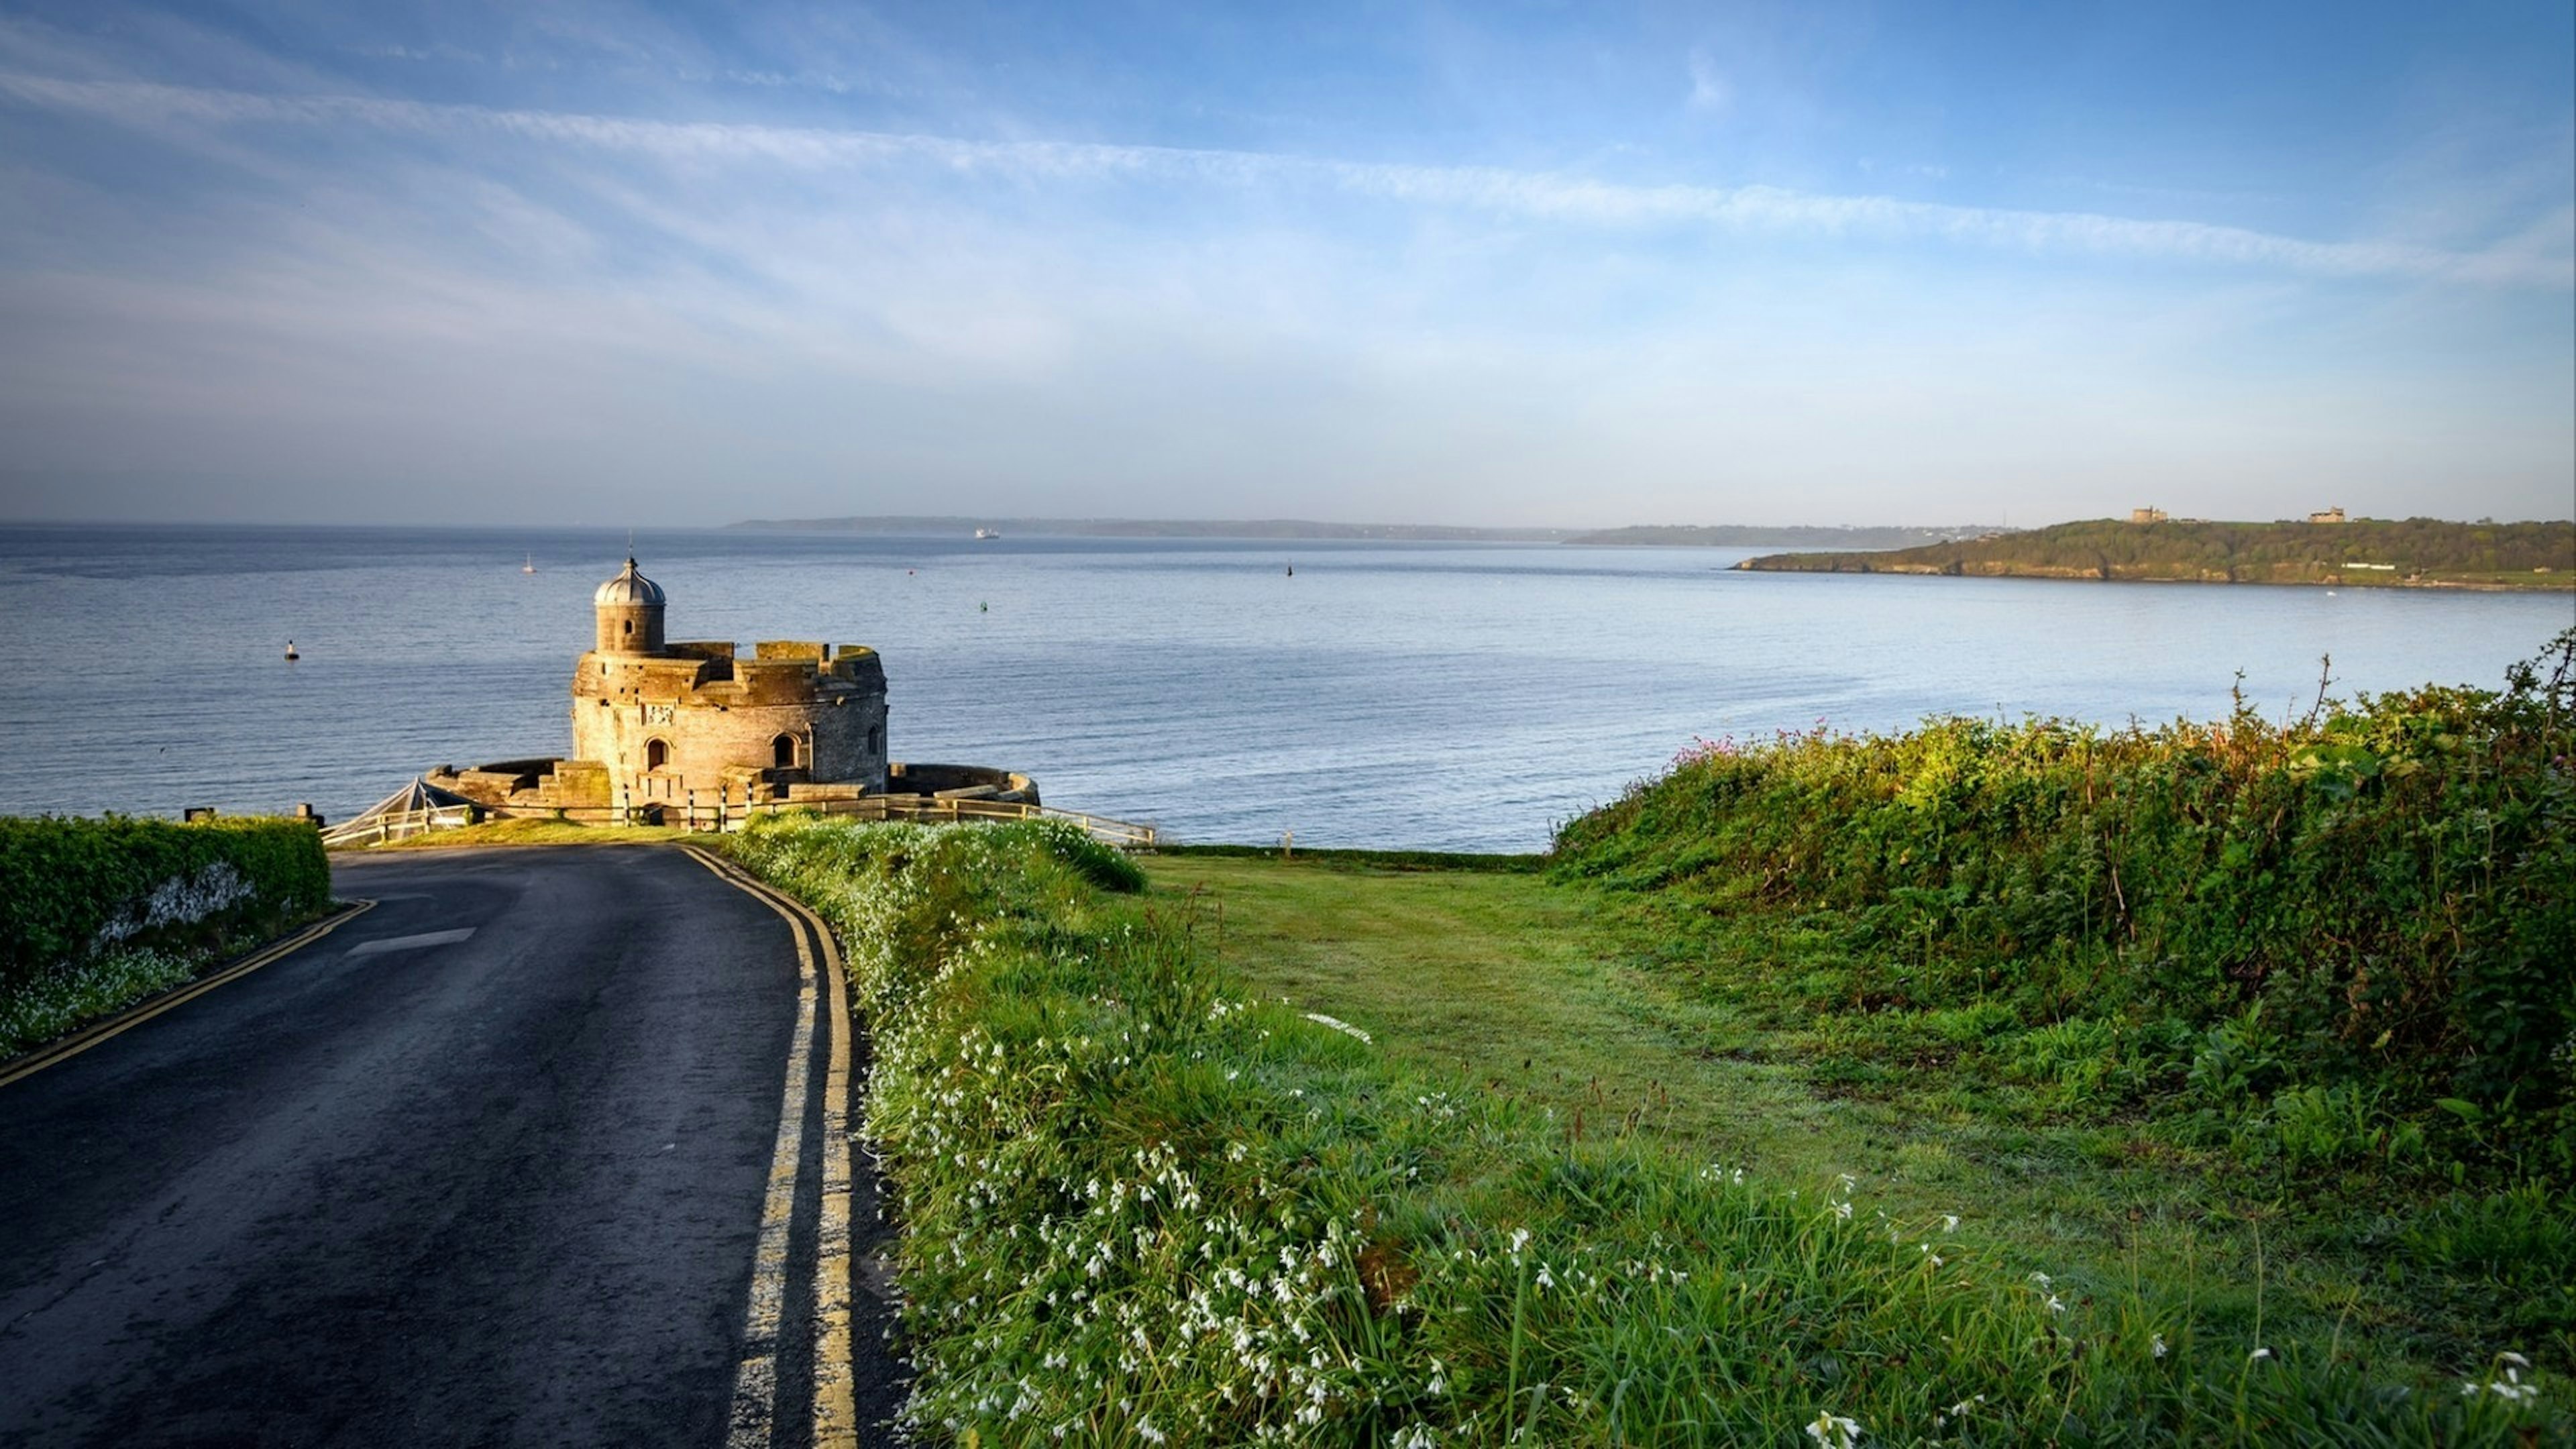 St Mawes castle lies on the south coast of Cornwall, England.